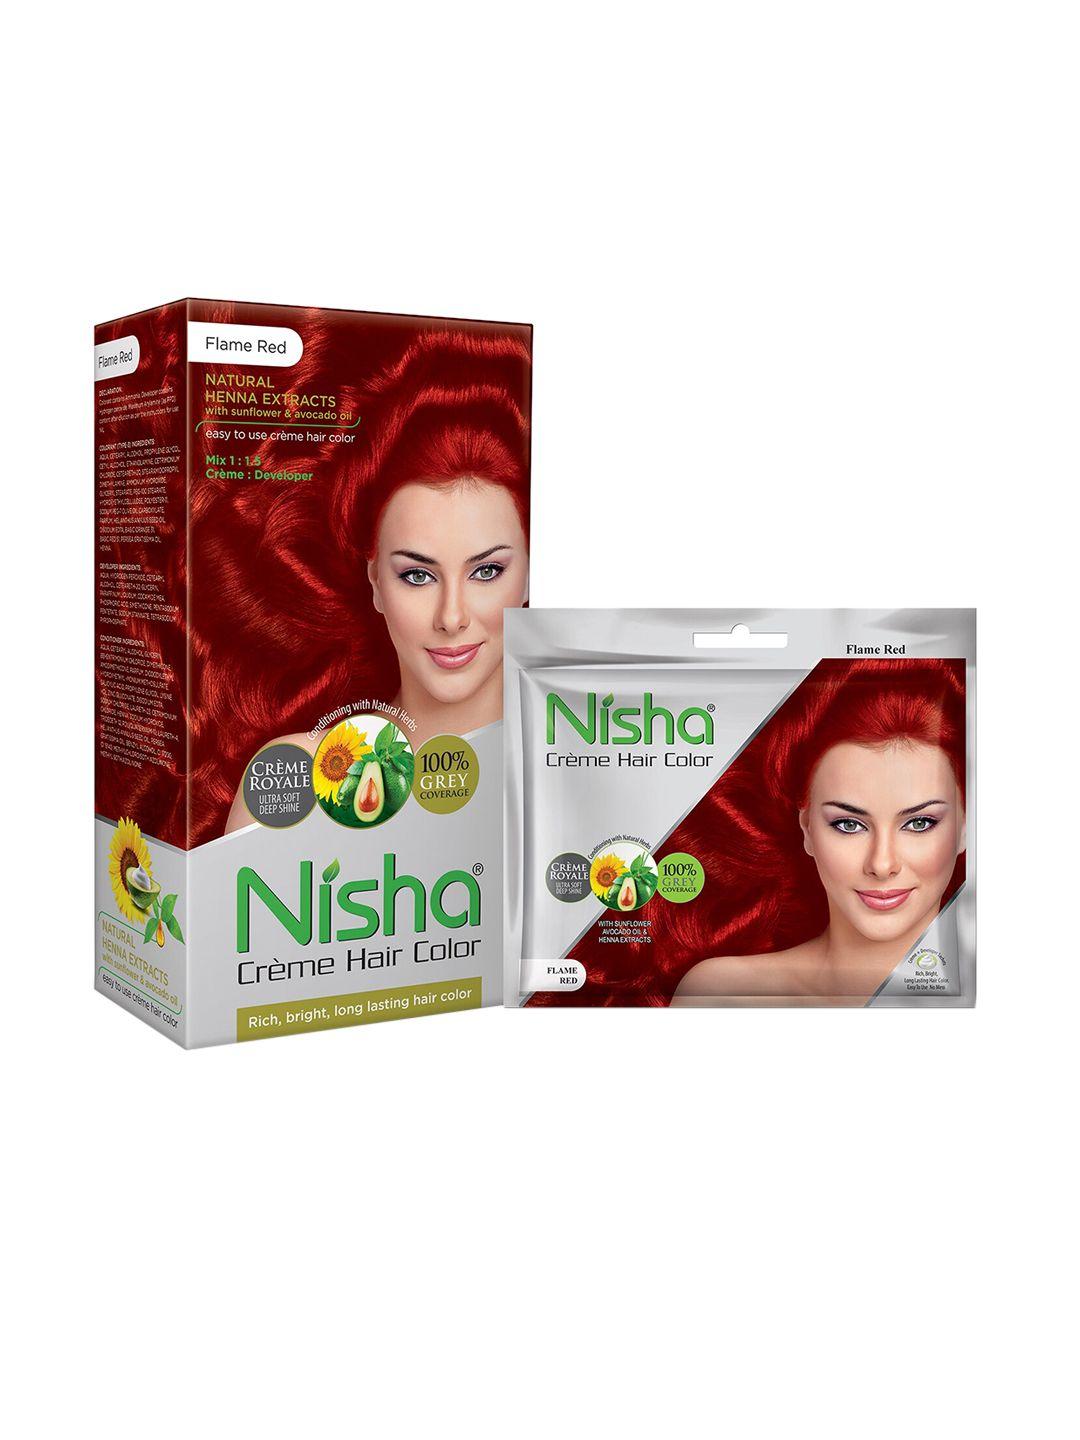 nisha creme long lasting hair colouring combo pack - flame red 160 gm